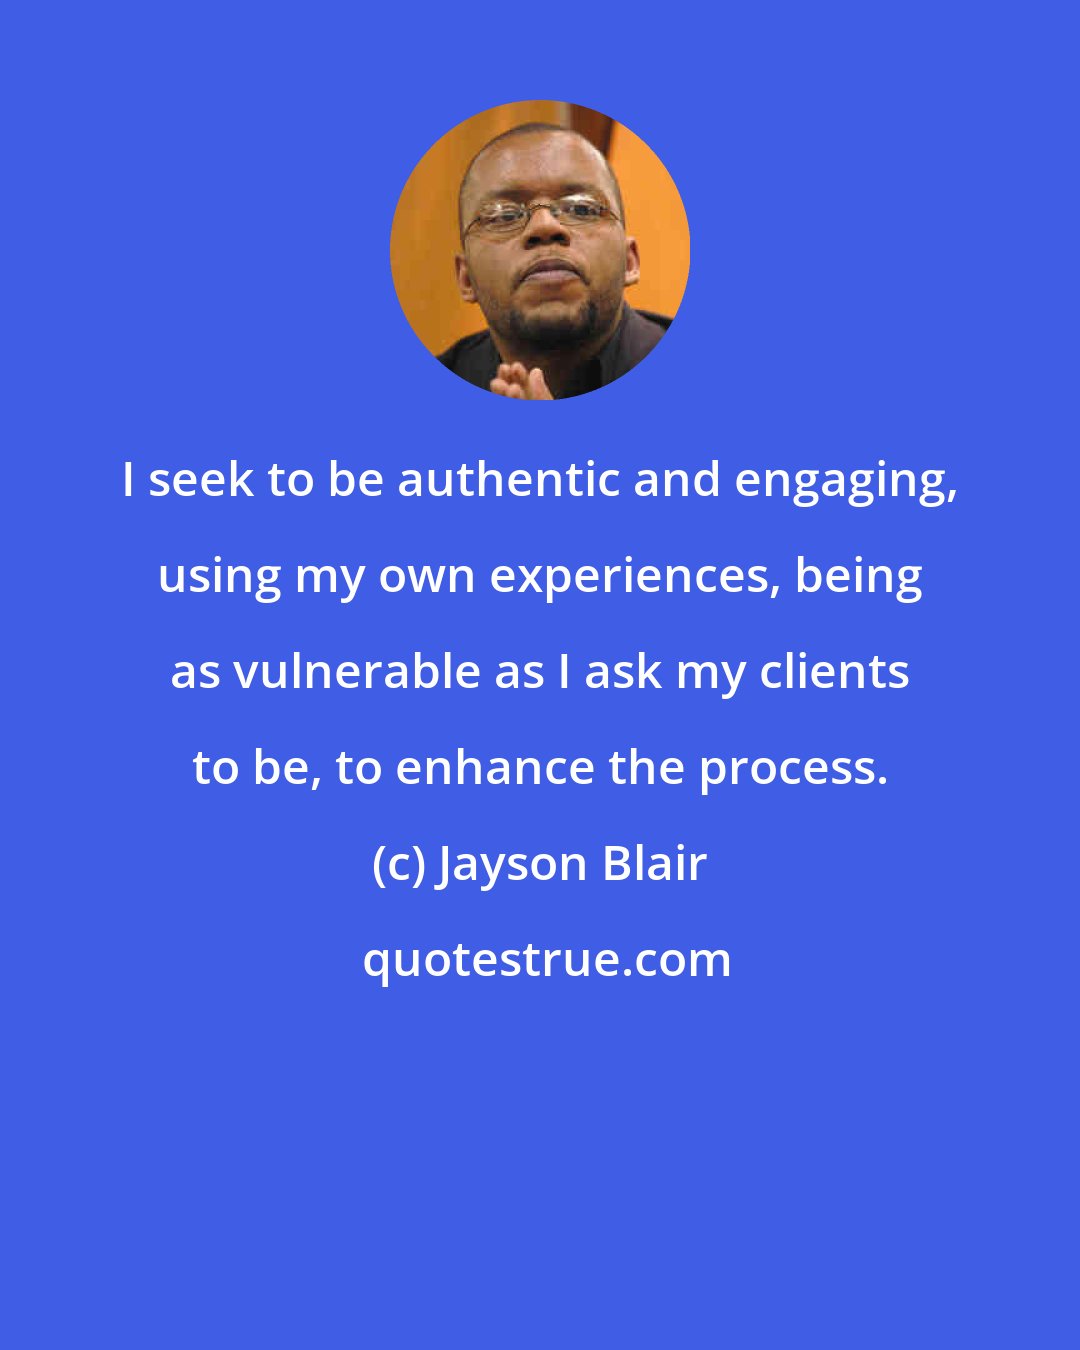 Jayson Blair: I seek to be authentic and engaging, using my own experiences, being as vulnerable as I ask my clients to be, to enhance the process.